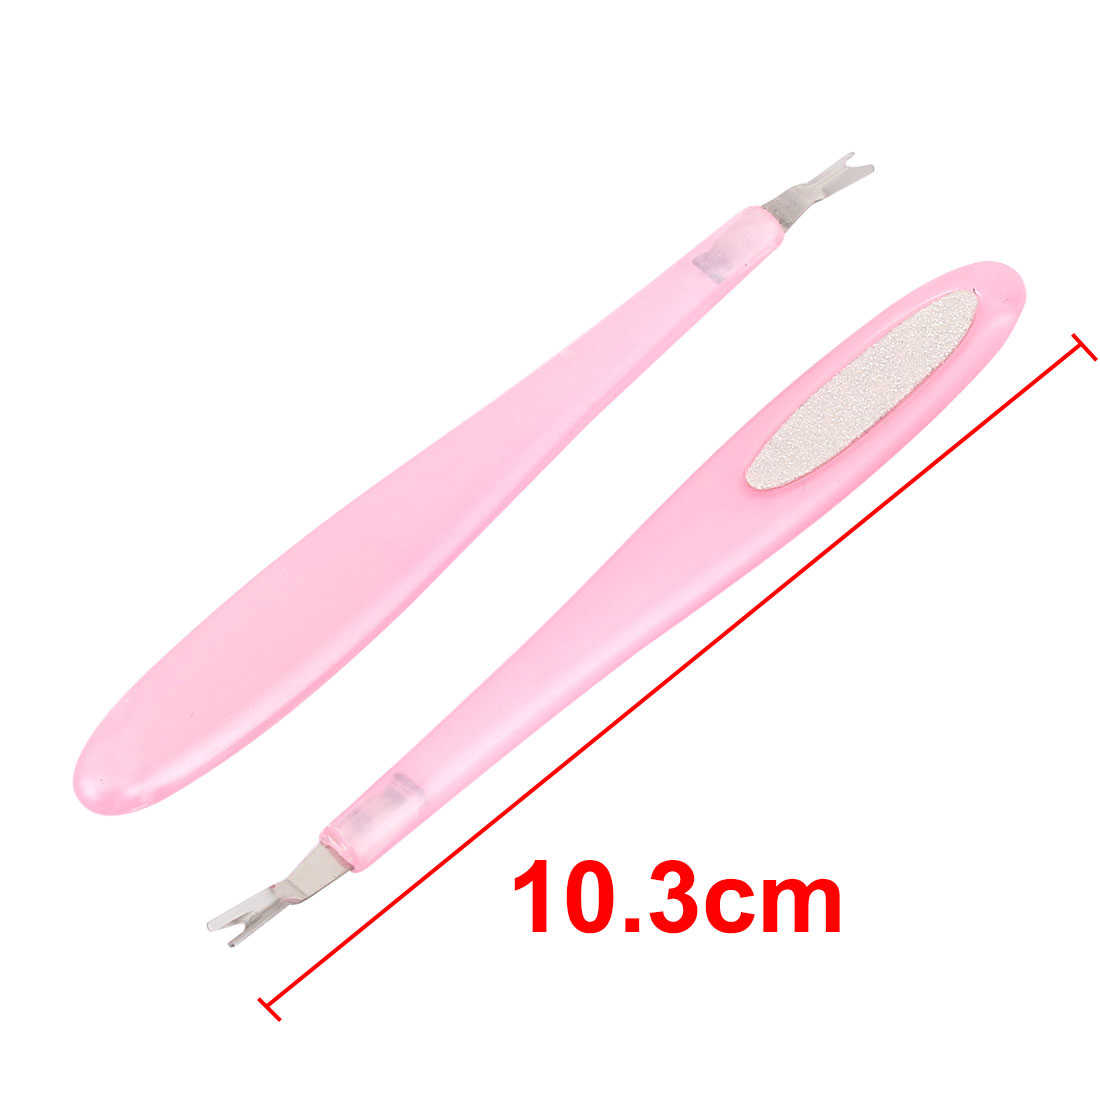 4pcs Ladies Plastic Handle Metal Cuticle Remover Nail File Manicure Tool Pink